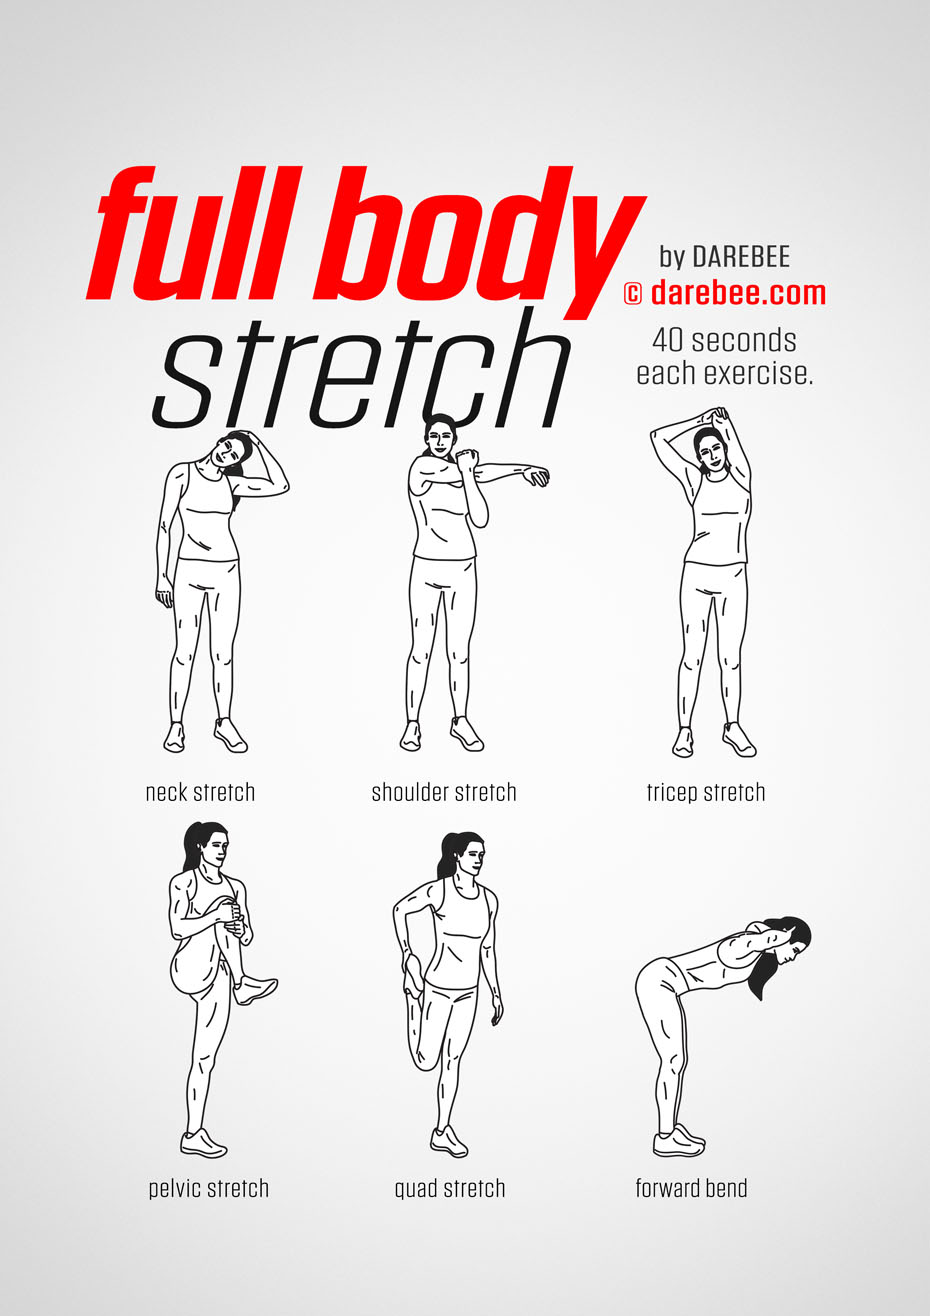 https://darebee.com/images/workouts/fullbody-stretch-workout.jpg